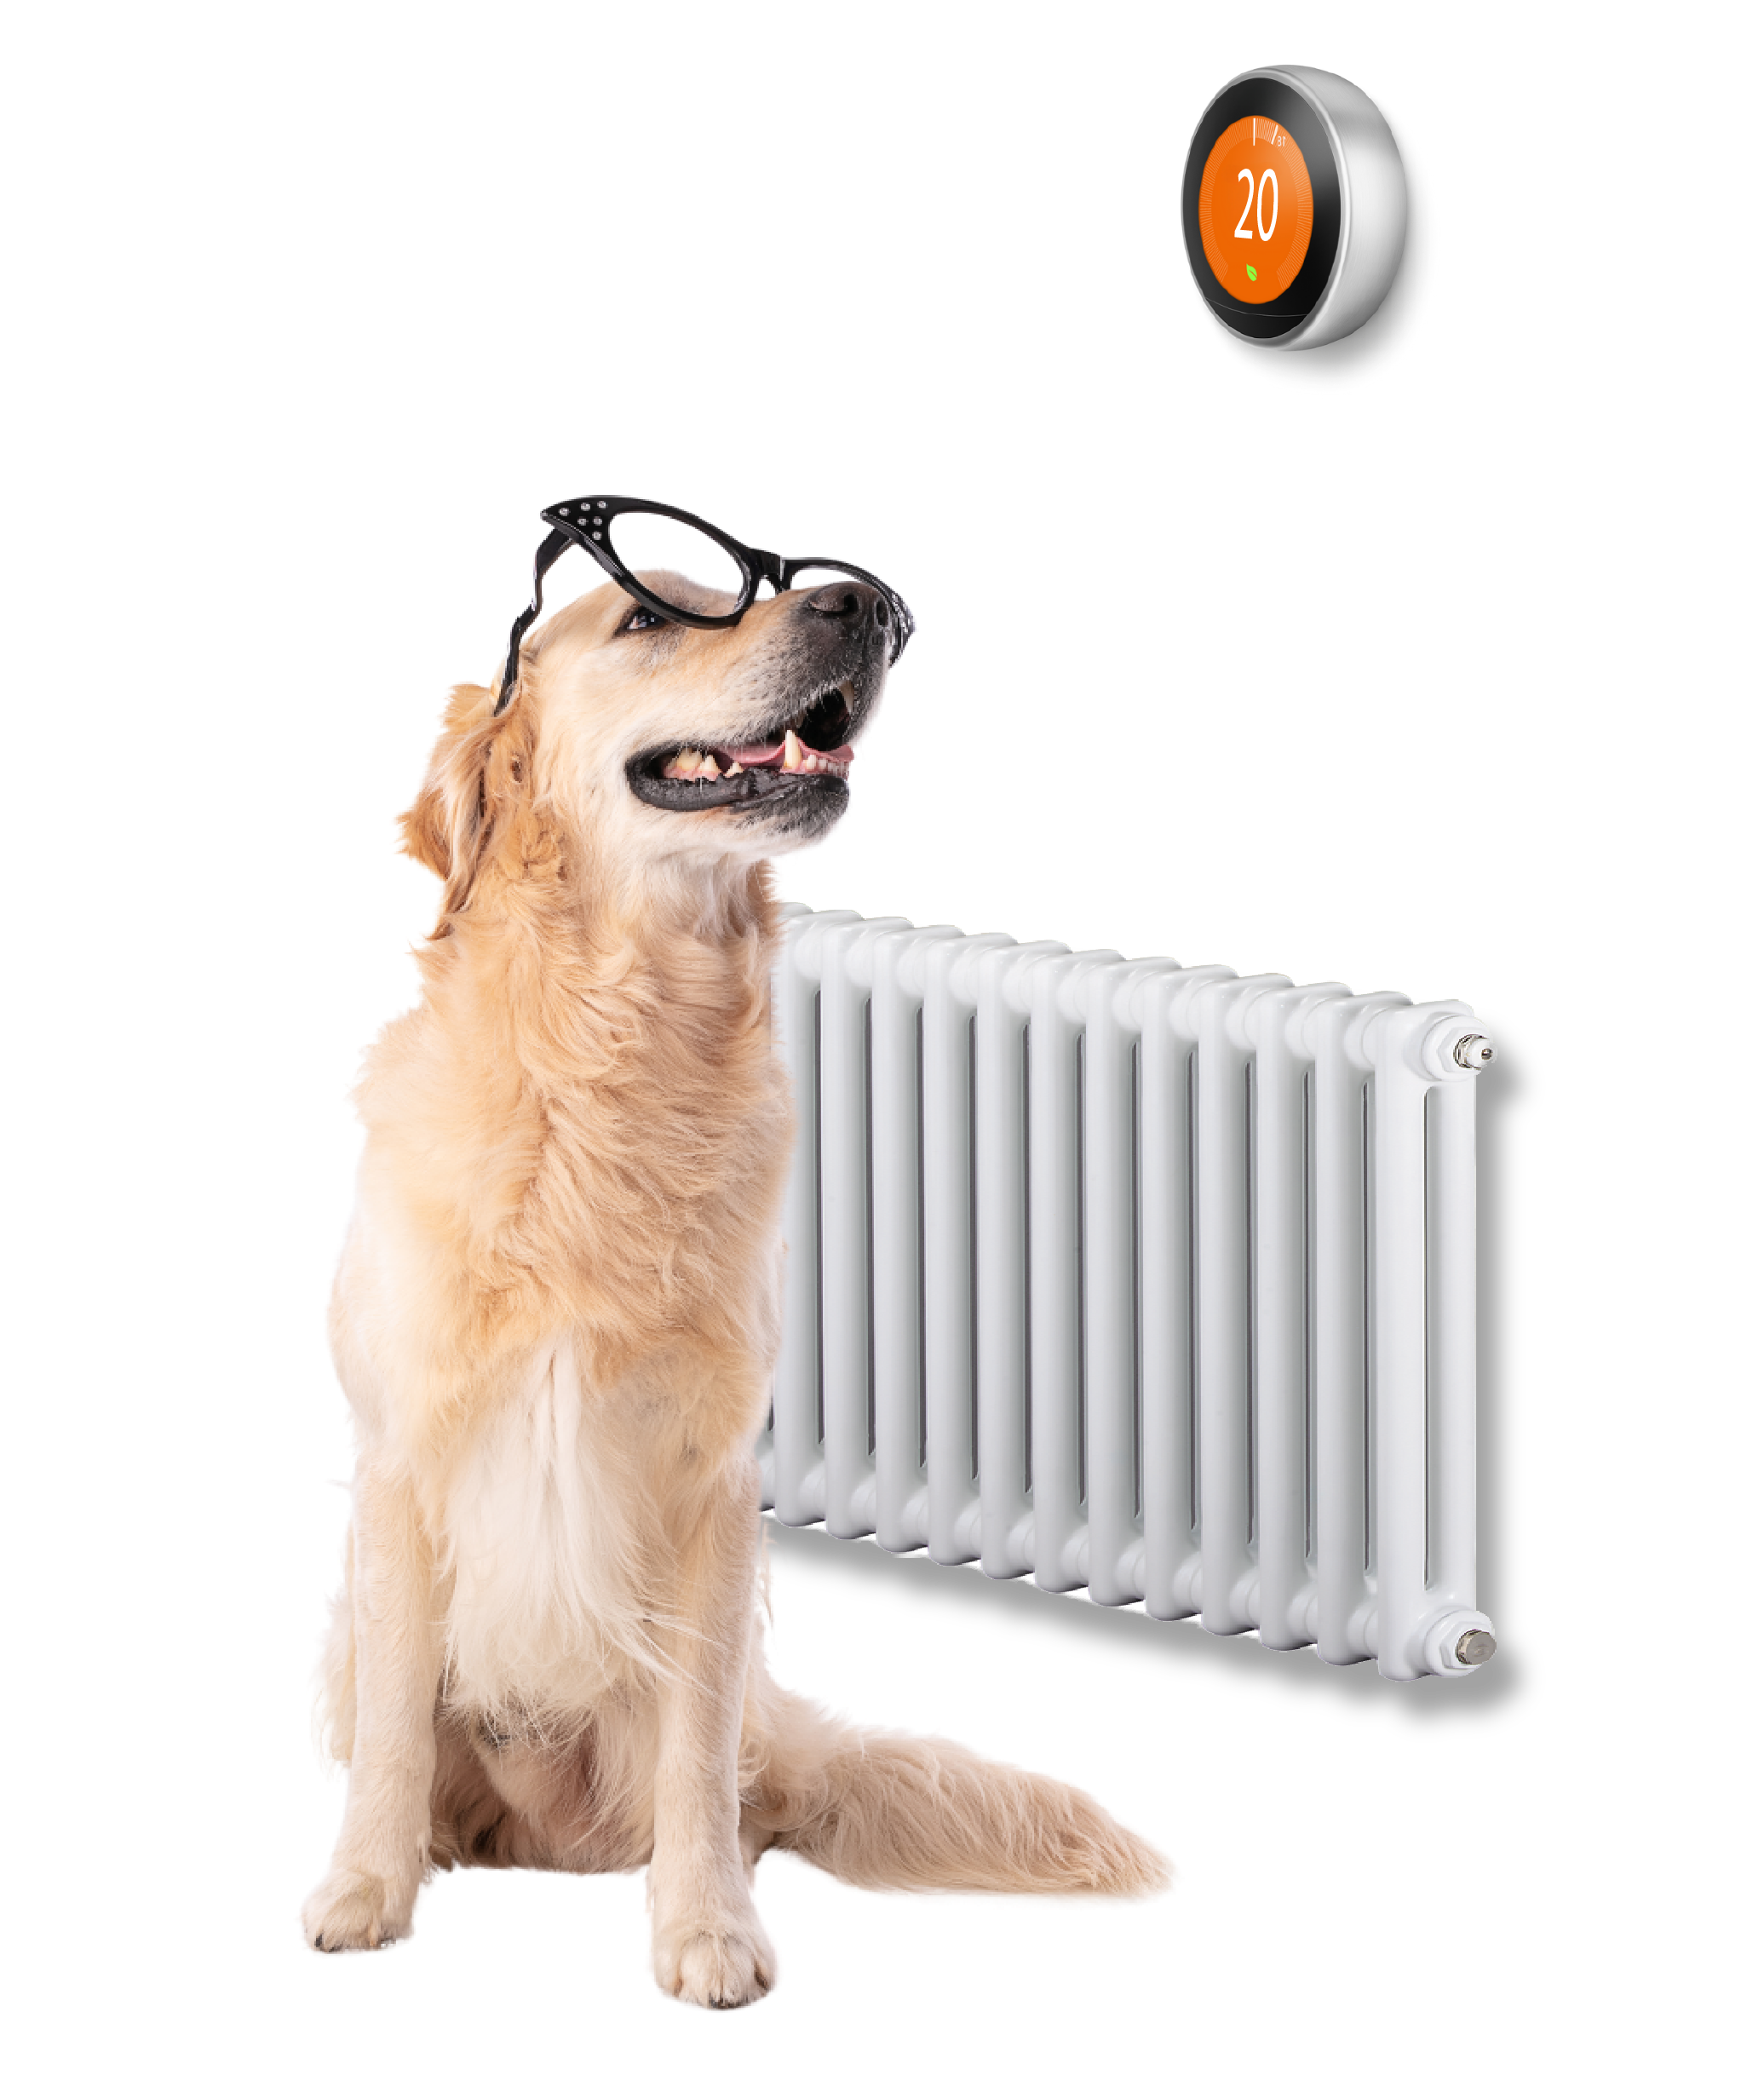 Dog wearing glasses, looking at a thermostat.